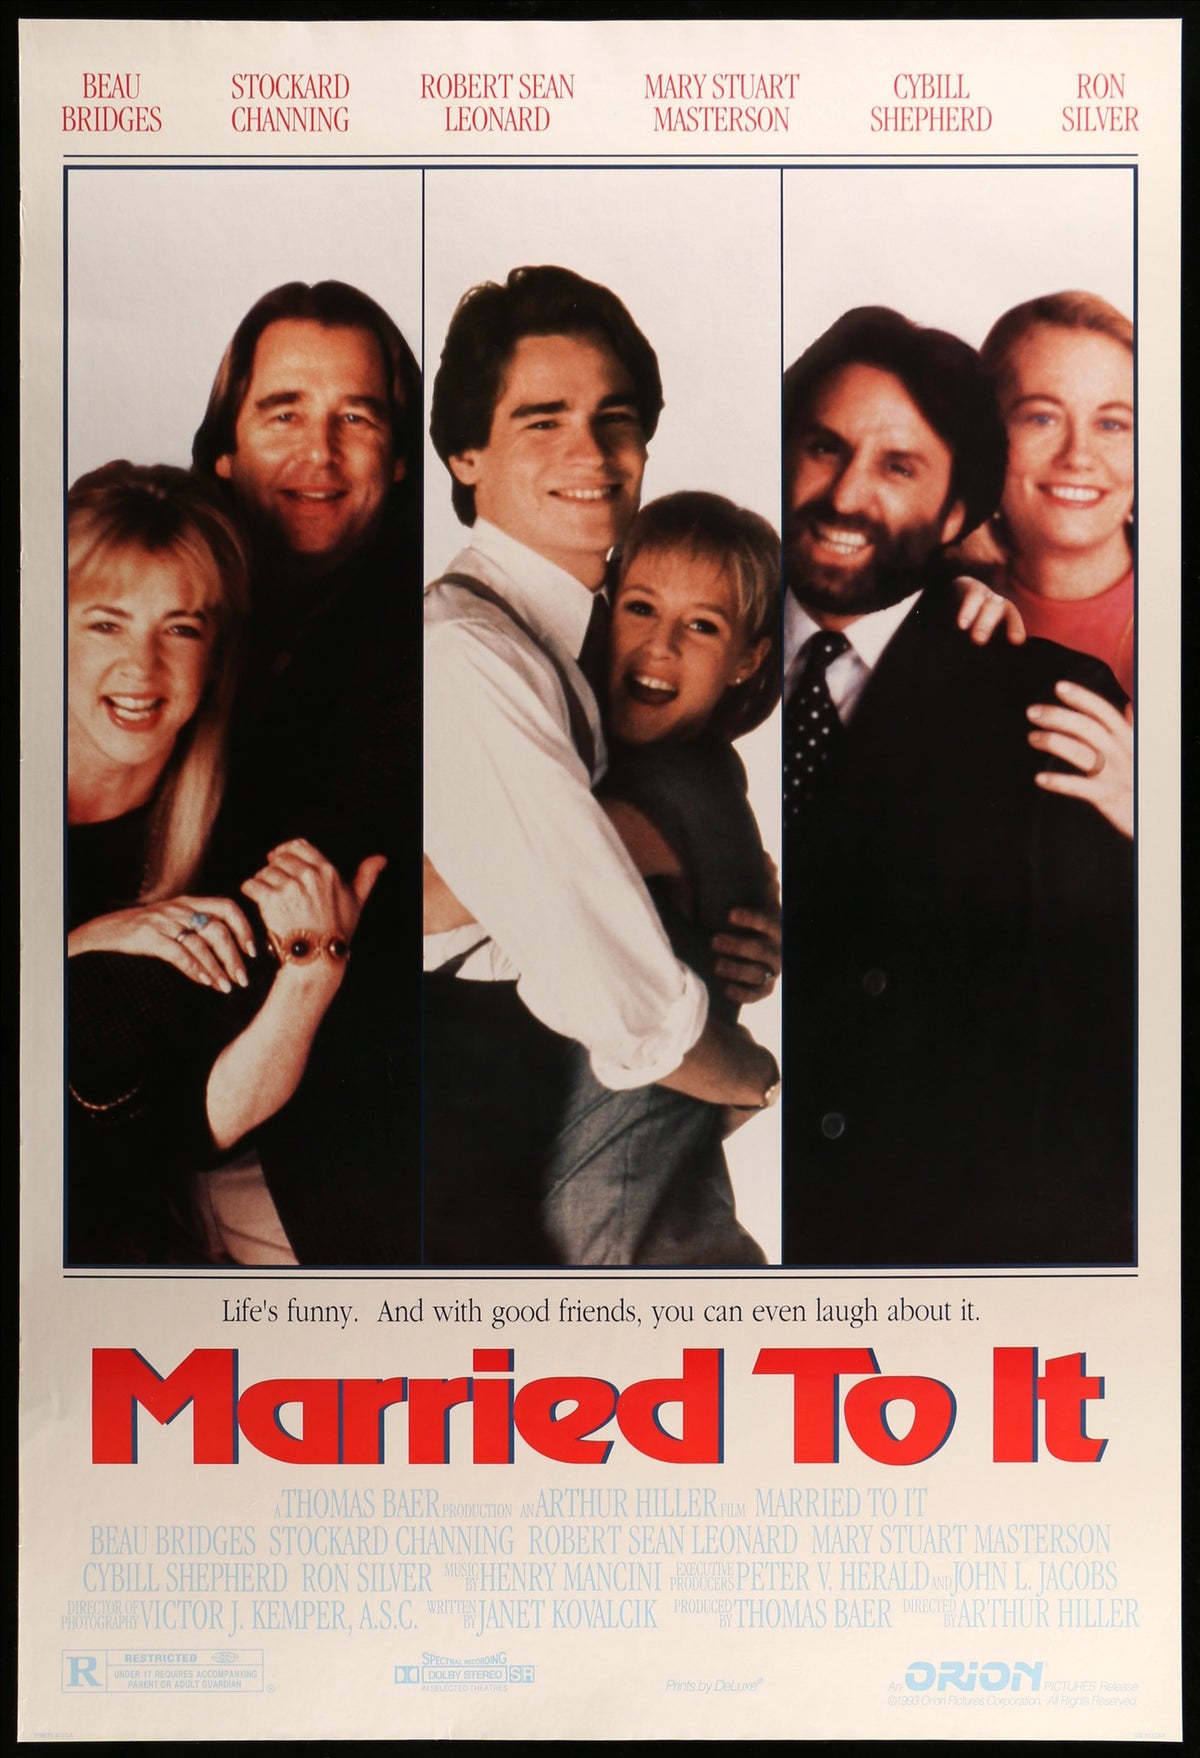 Married To It (1991) original movie poster for sale at Original Film Art